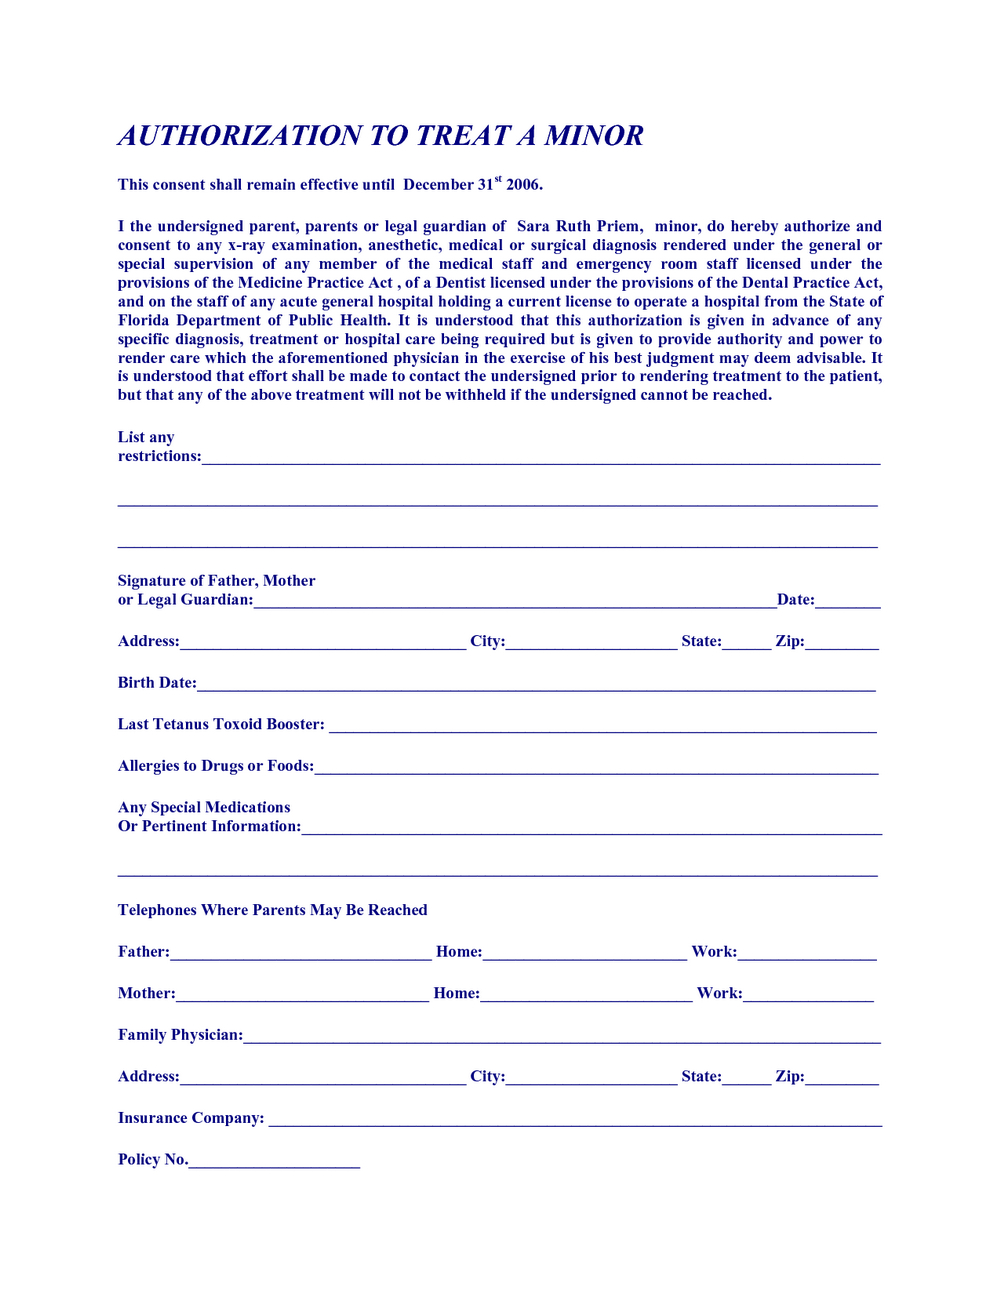 Free Printable Child Medical Consent Form For Grandparents | Mbm Legal - Free Printable Child Medical Consent Form